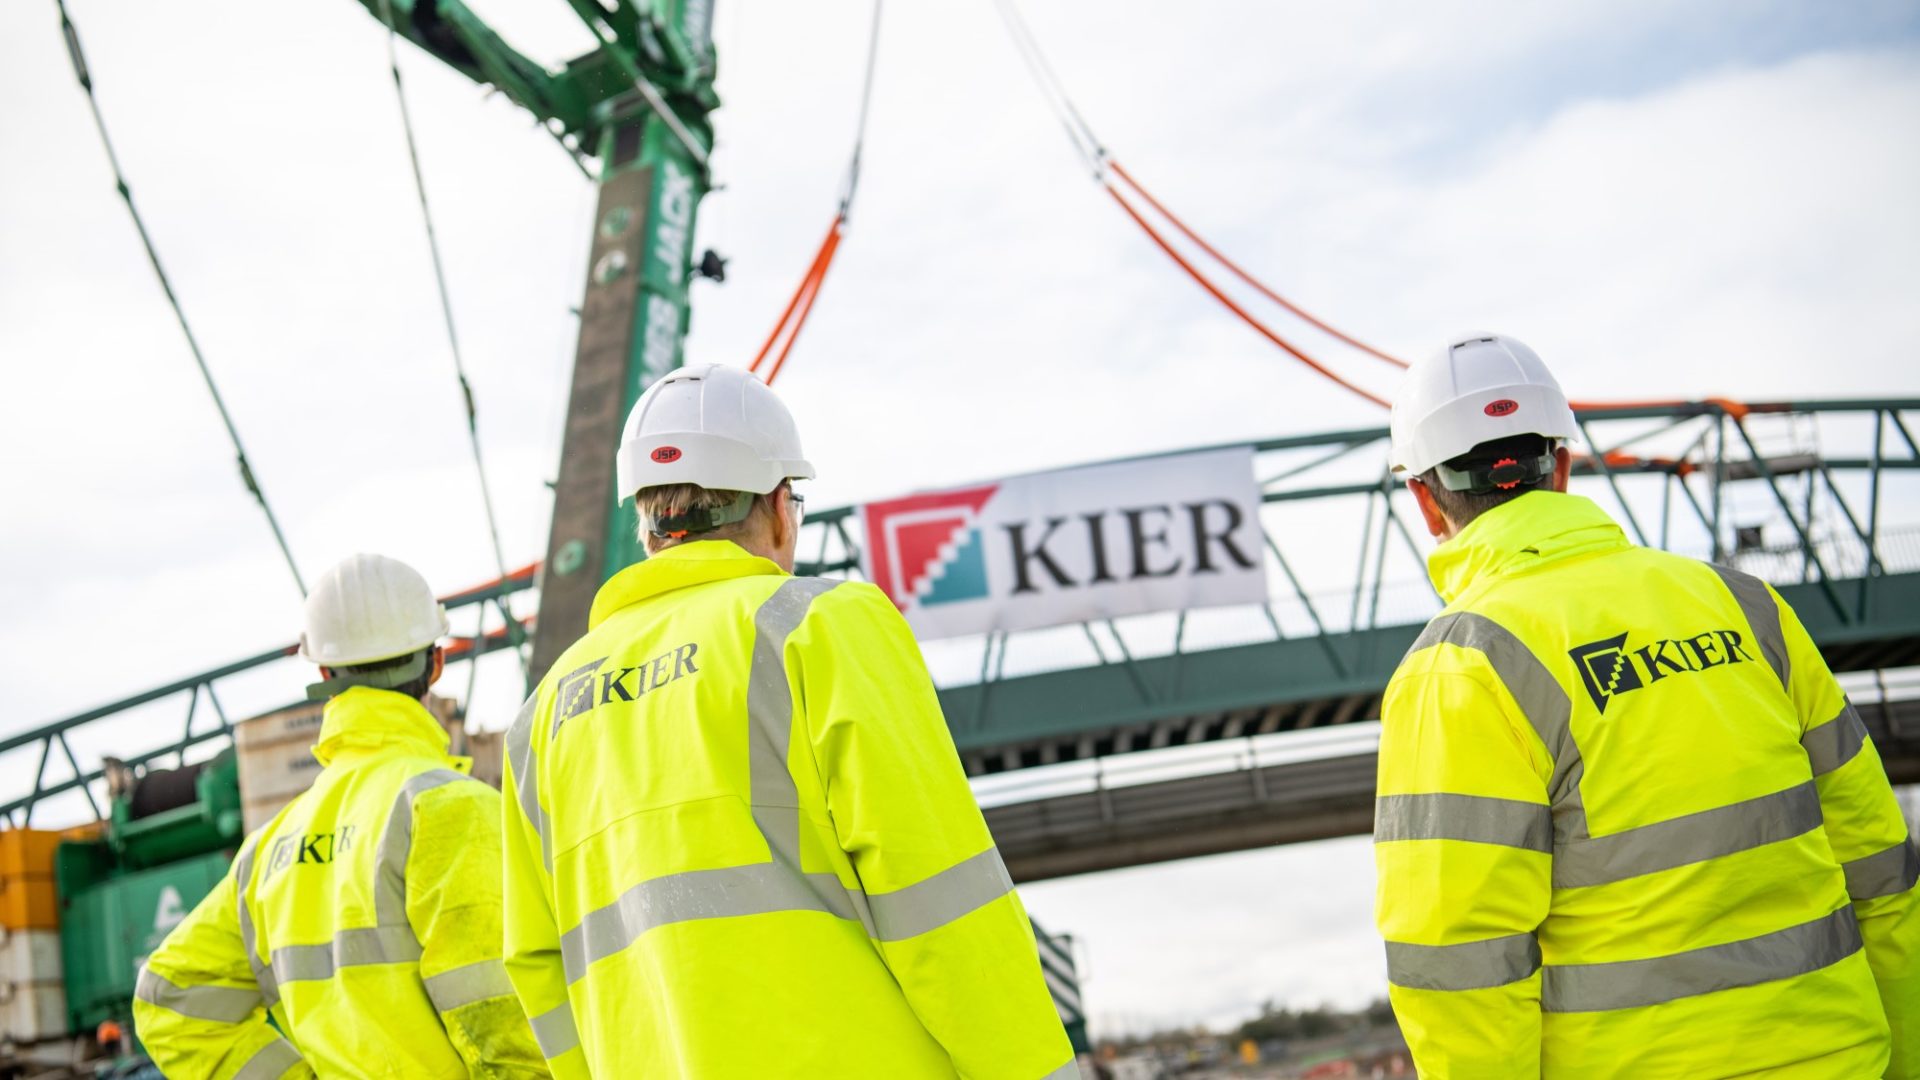 Digital Construction Awards Contractor Kier’s strategy has promoted a digital-first culture across its projects (image: Kier)